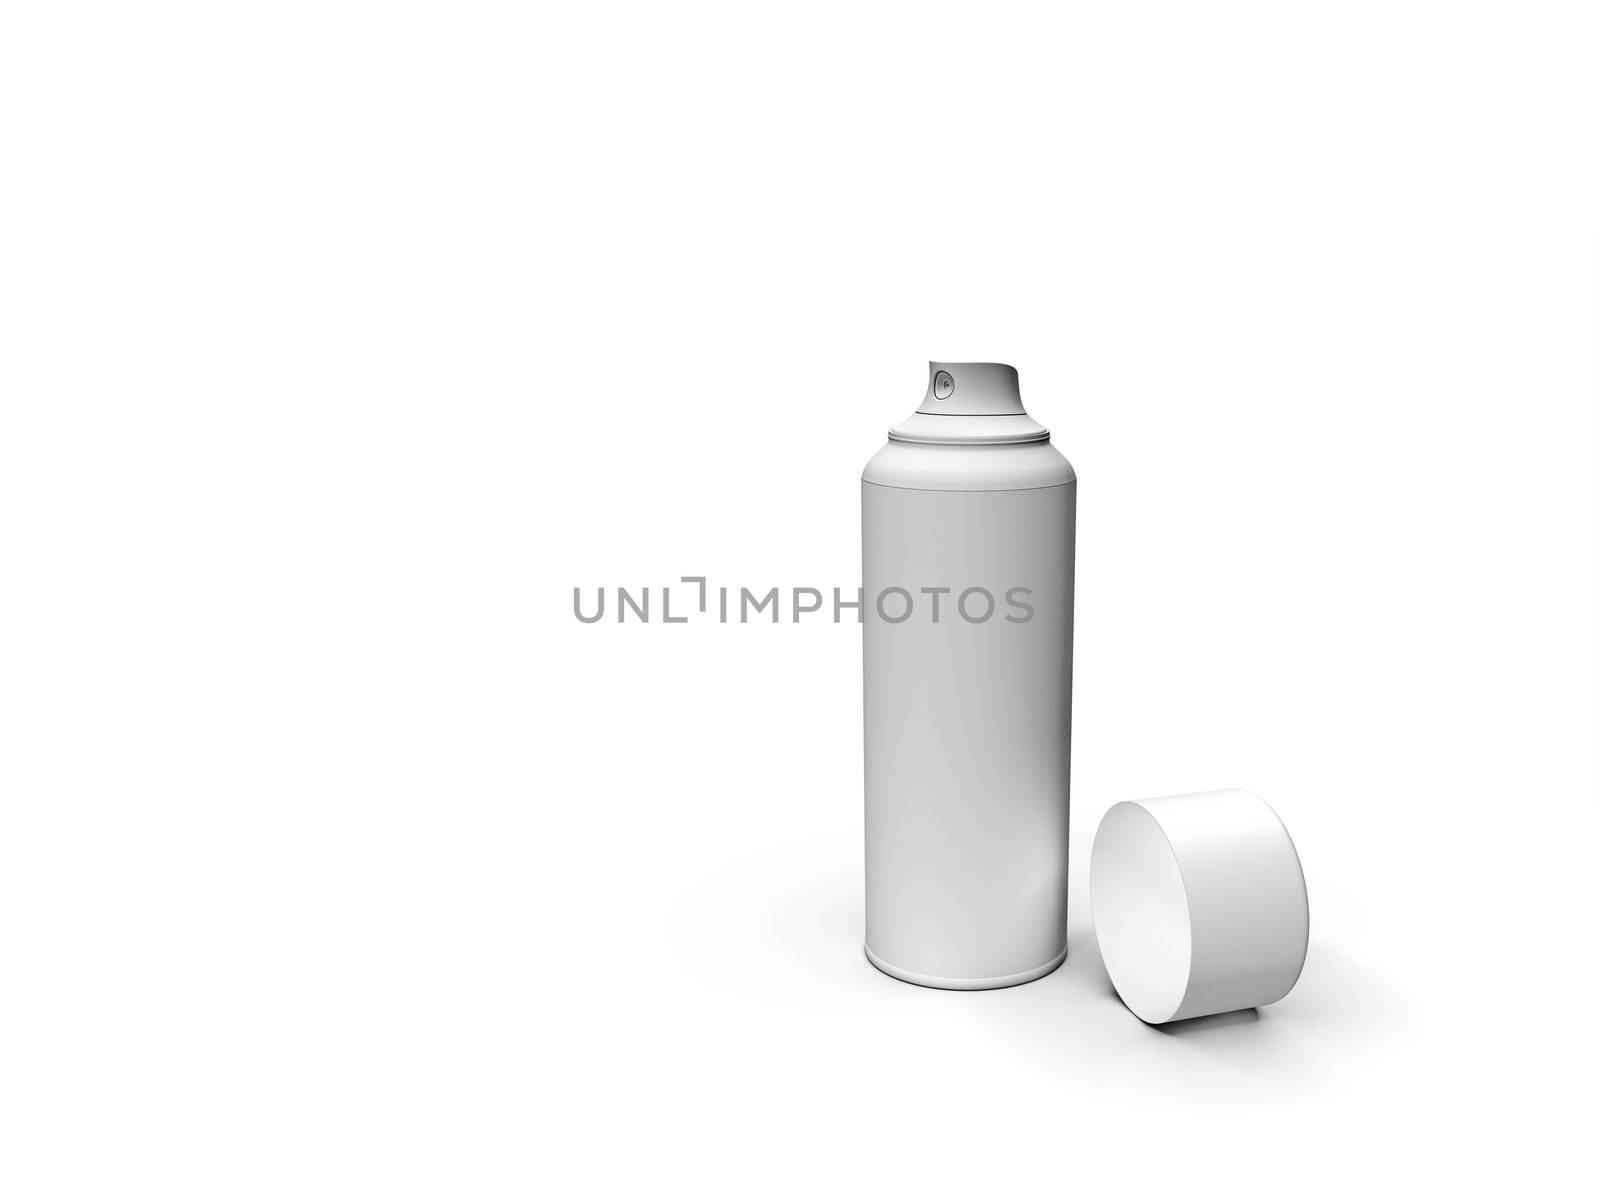 An image of a rendered white spray